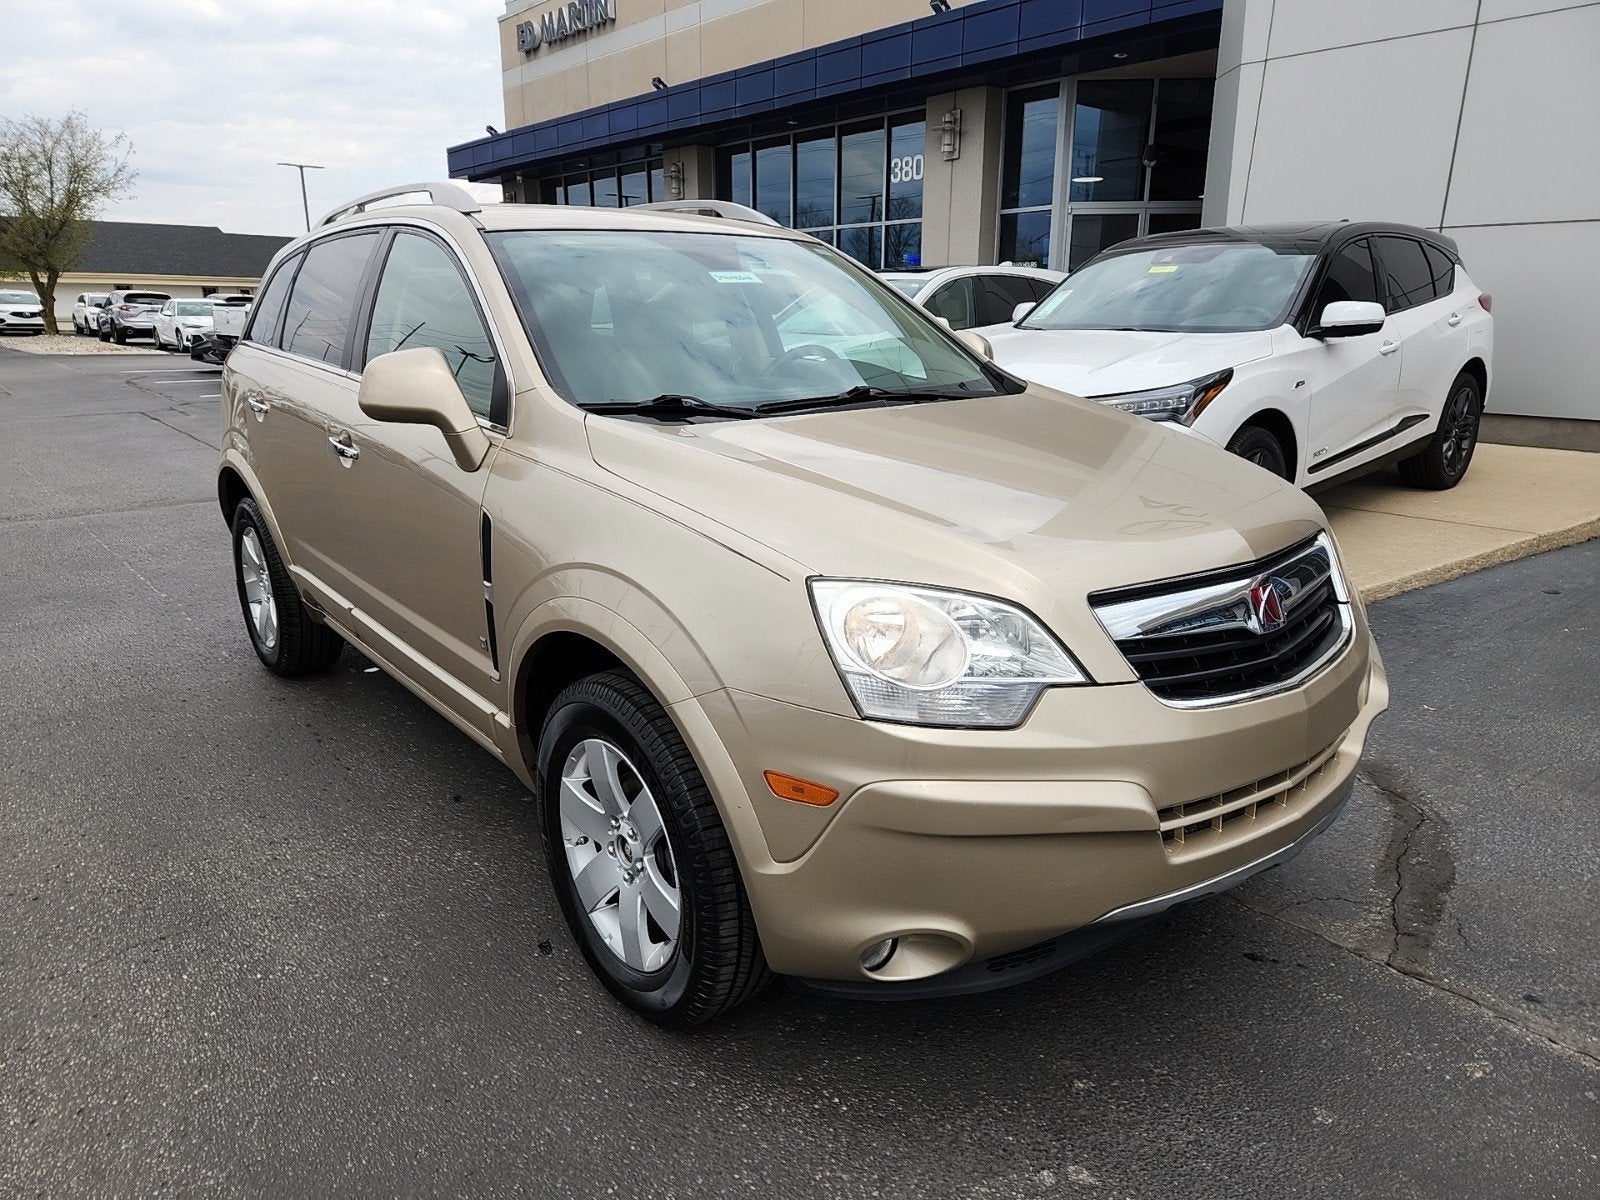 Used 2008 Saturn VUE XR with VIN 3GSCL53738S692774 for sale in Indianapolis, IN